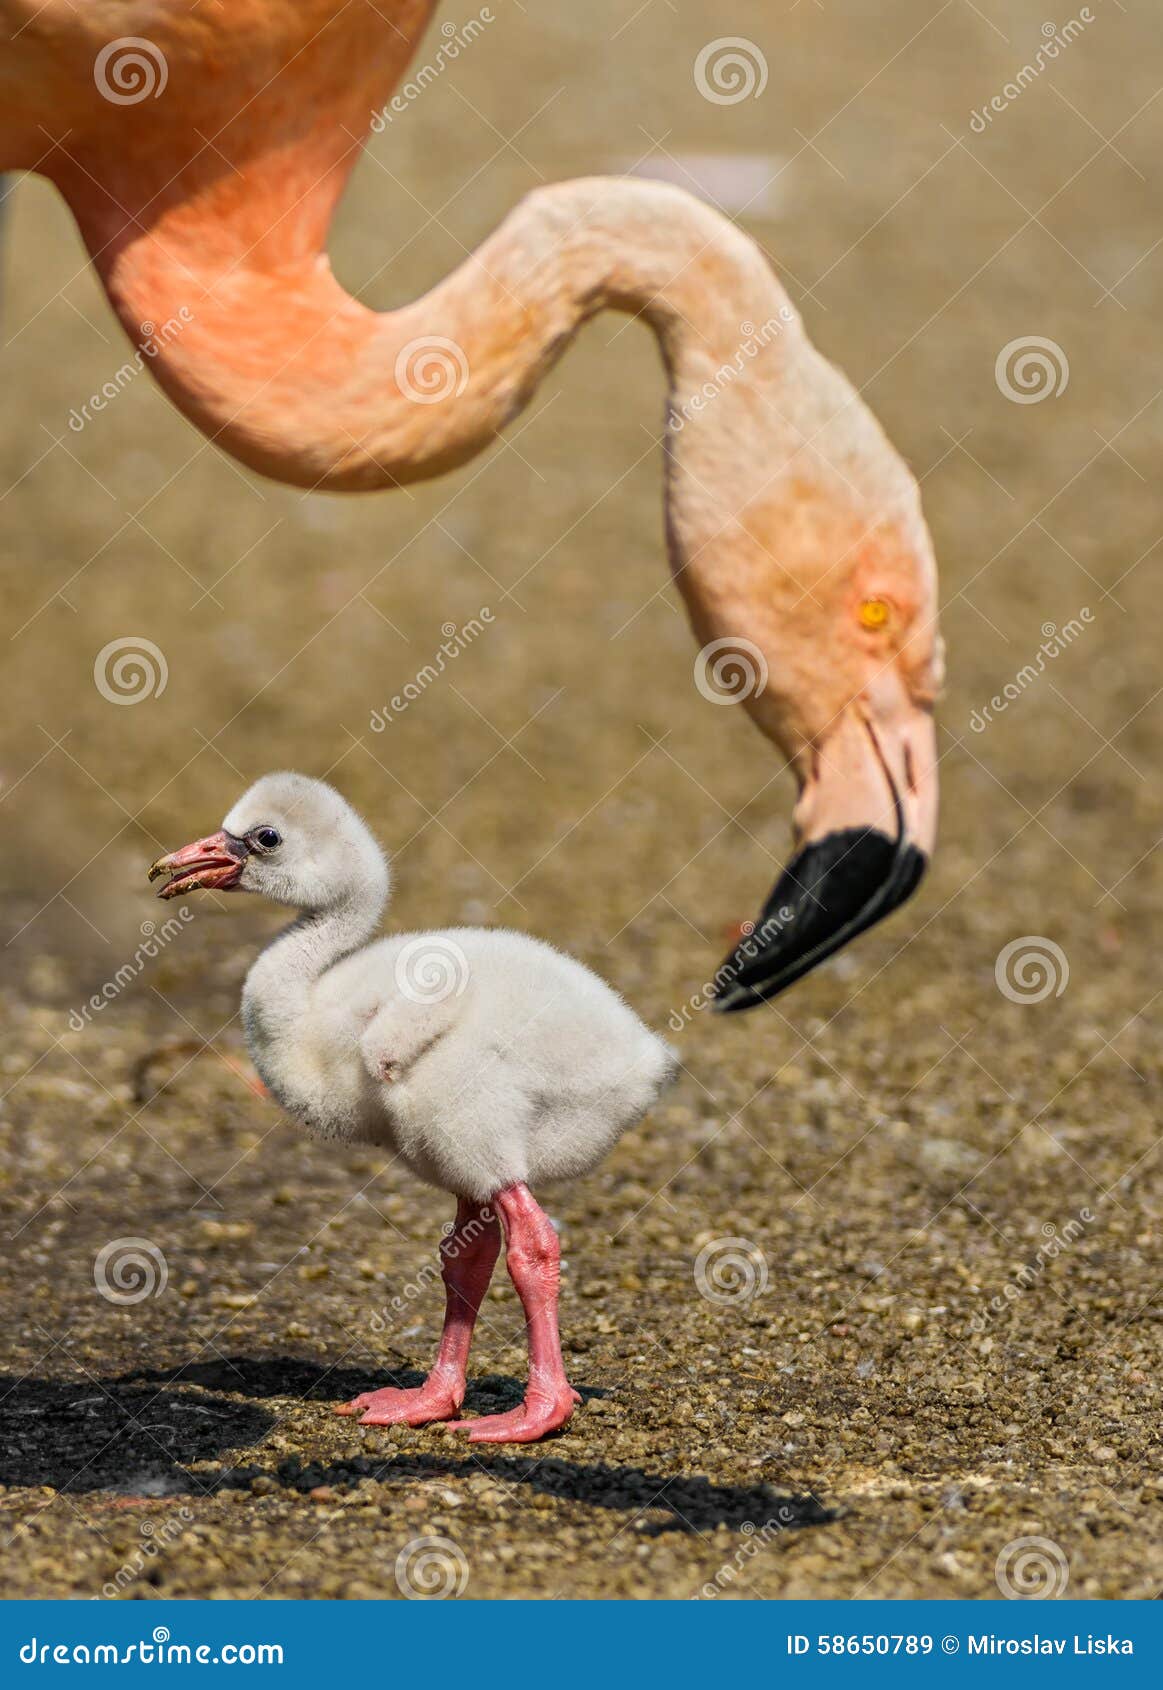 Baby bird of the American flamingo (Phoenicopterus ruber) near to its parent.